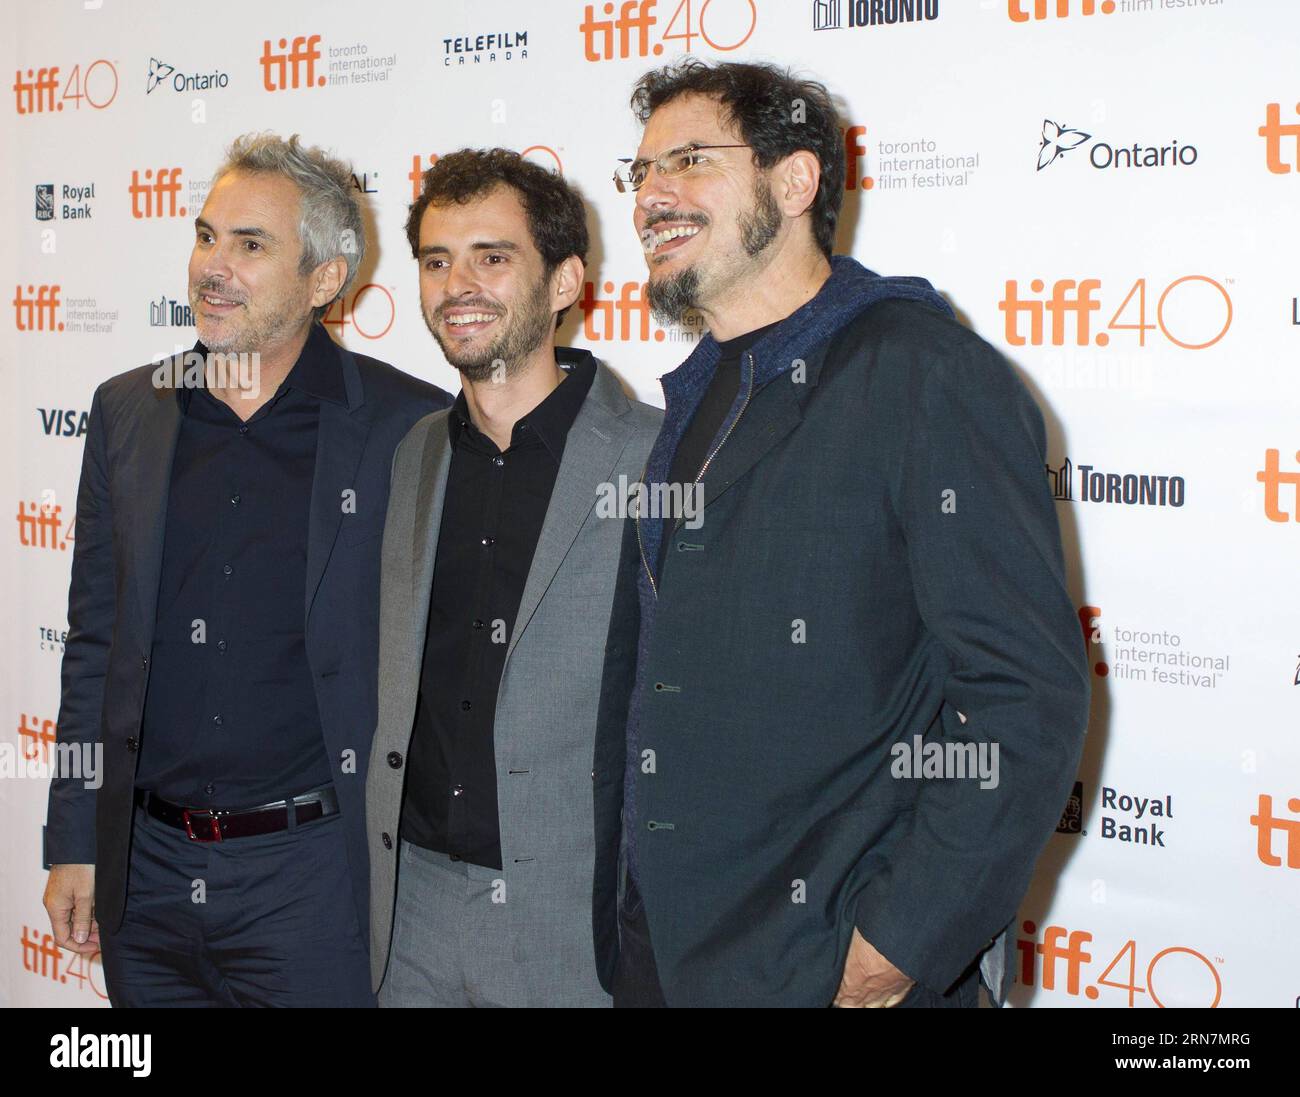 (150914) -- TORONTO, Sept. 13, 2015 -- Directors Alfonso Cuaron (L) and Jonas Cuaron (C) pose for photos before the world premiere of film Desierto at the Elgin Theater during the 40th Toronto International Film Festival in Toronto, Canada, on Sept. 13, 2015. ) CANADA-TORONTO-40TH TORONTO INTERNATIONAL FILM FESTIVAL- DESIERTO ZouxZheng PUBLICATIONxNOTxINxCHN   150914 Toronto Sept 13 2015 Directors Alfonso Cuaron l and Jonas Cuaron C Pose for Photos Before The World Premiere of Film Desierto AT The Elgin Theatre during The 40th Toronto International Film Festival in Toronto Canada ON Sept 13 20 Stock Photo